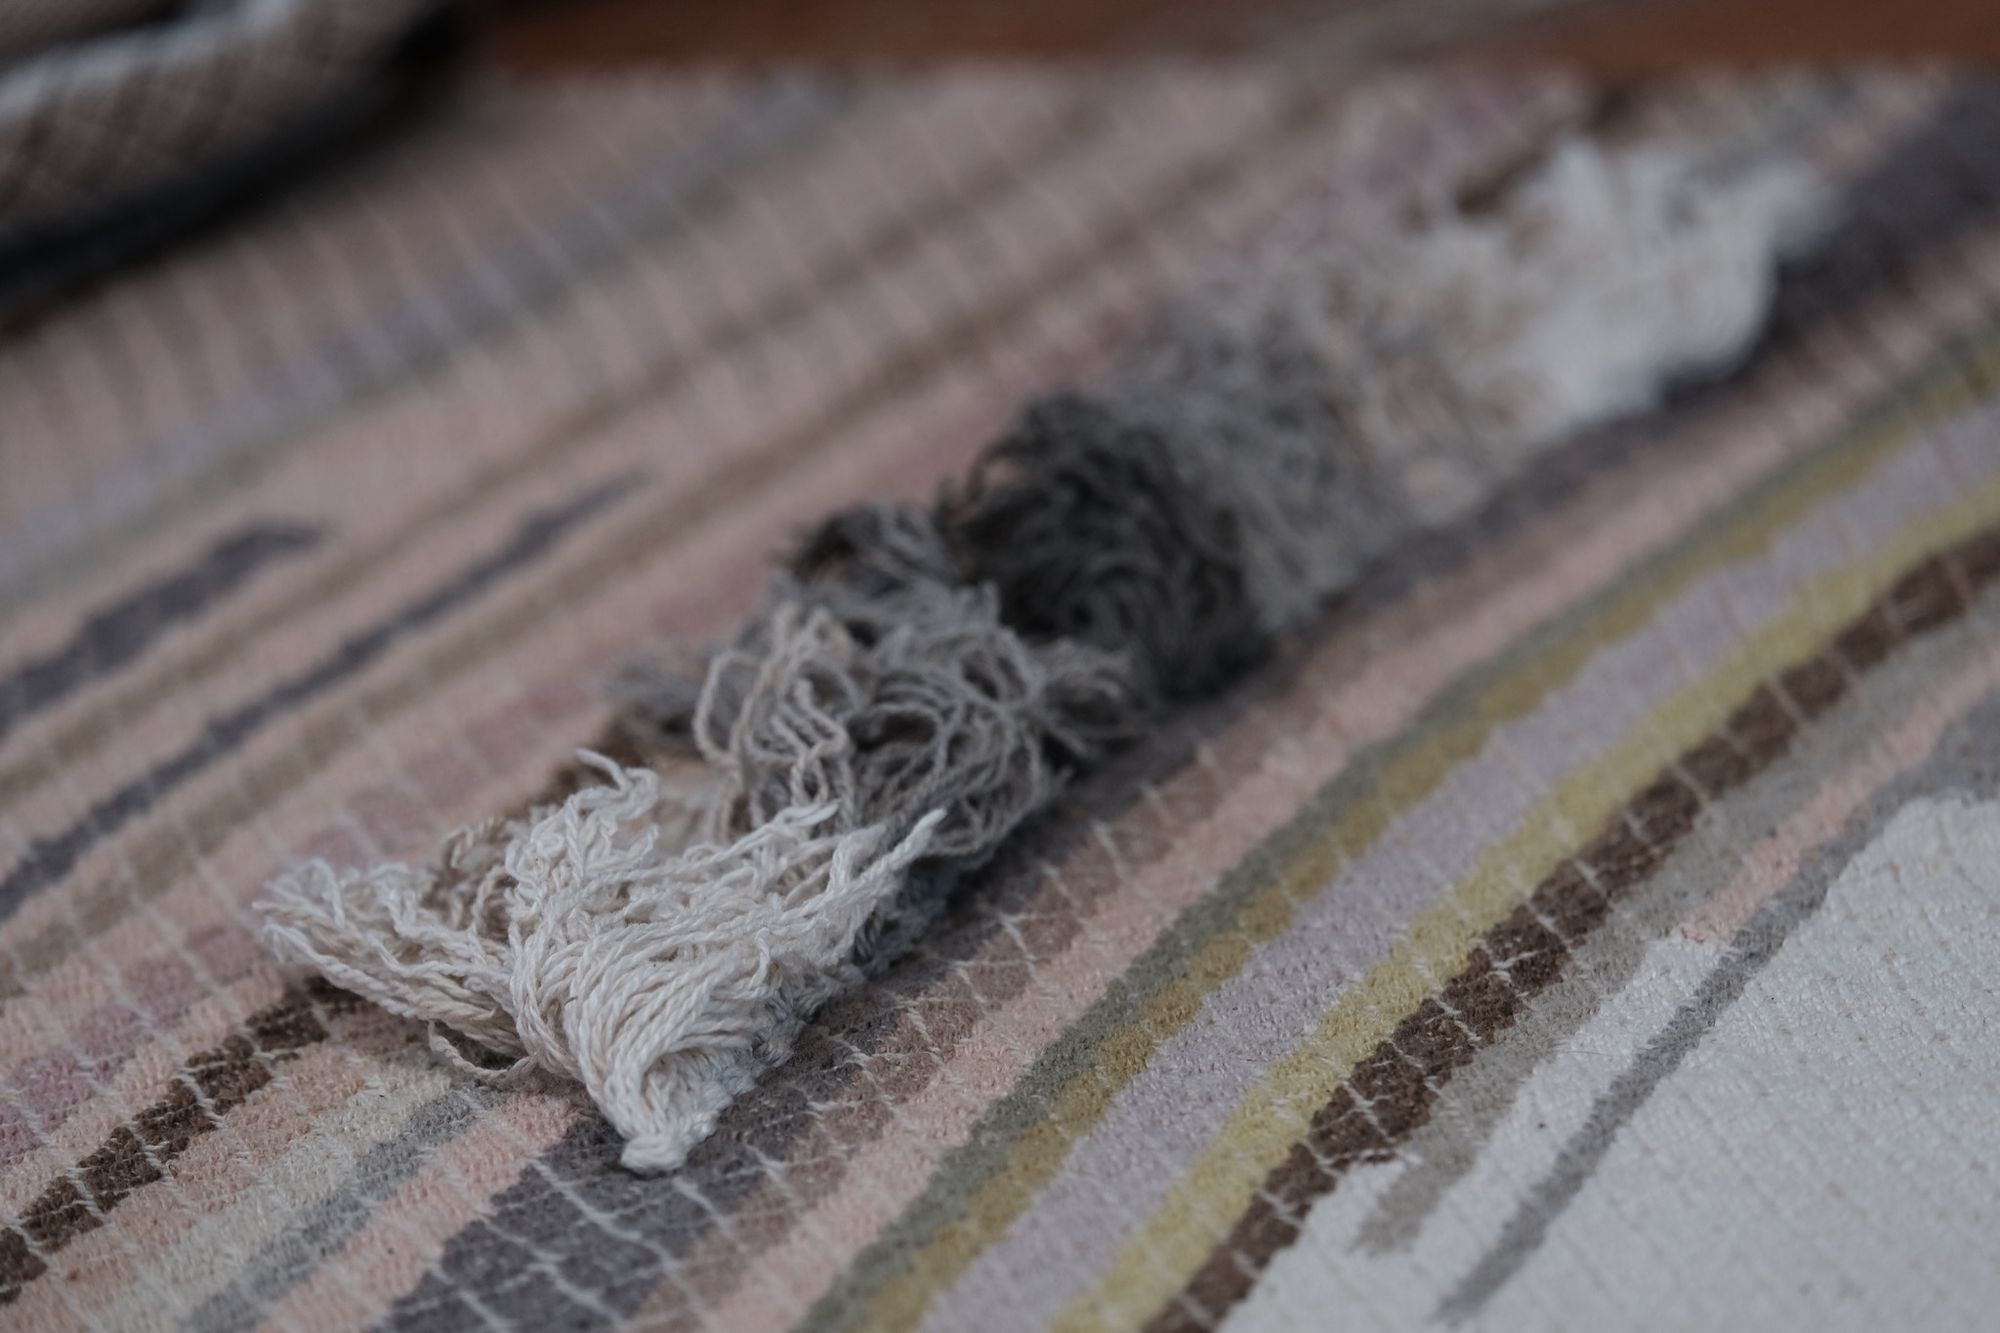 handwoven fabric of Naturally dyed subtle rainbow hues with a diamond texture pattern and graded gray fringe lays on a wooden floor